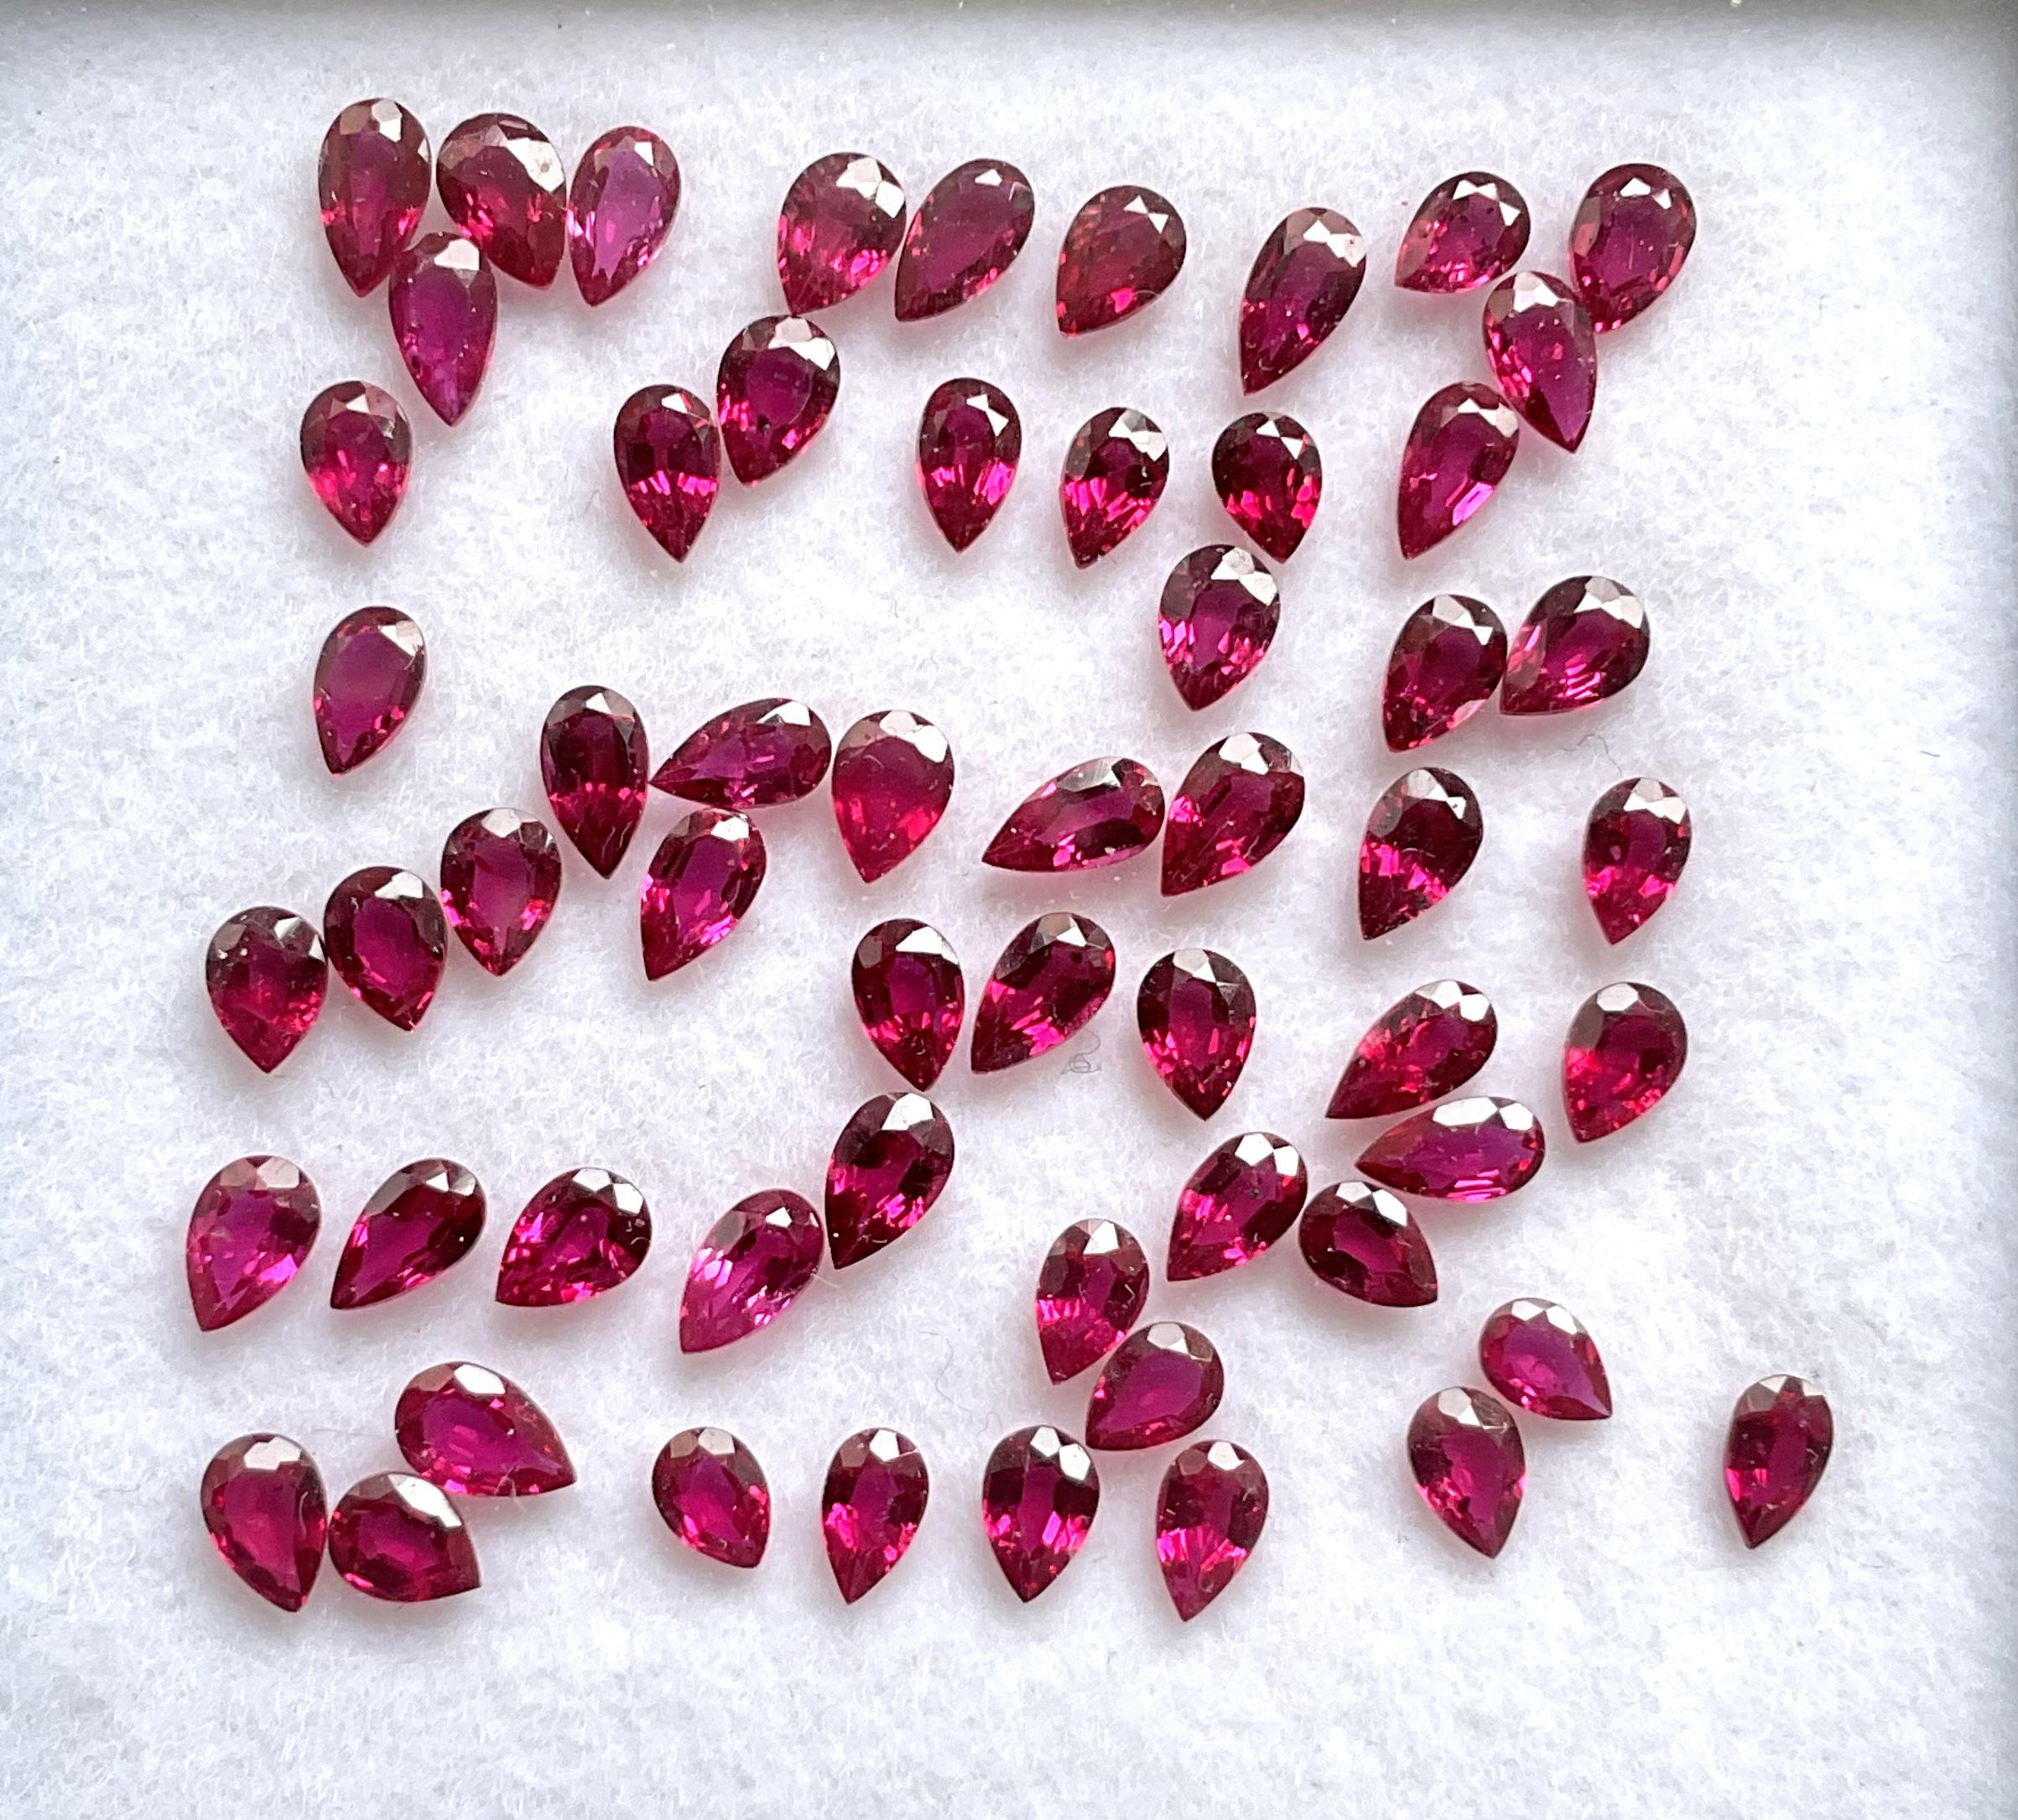 8.21 Carats Mozambique Ruby Top Quality Pear Cut stone No Heat Natural Gemstone For Sale 3